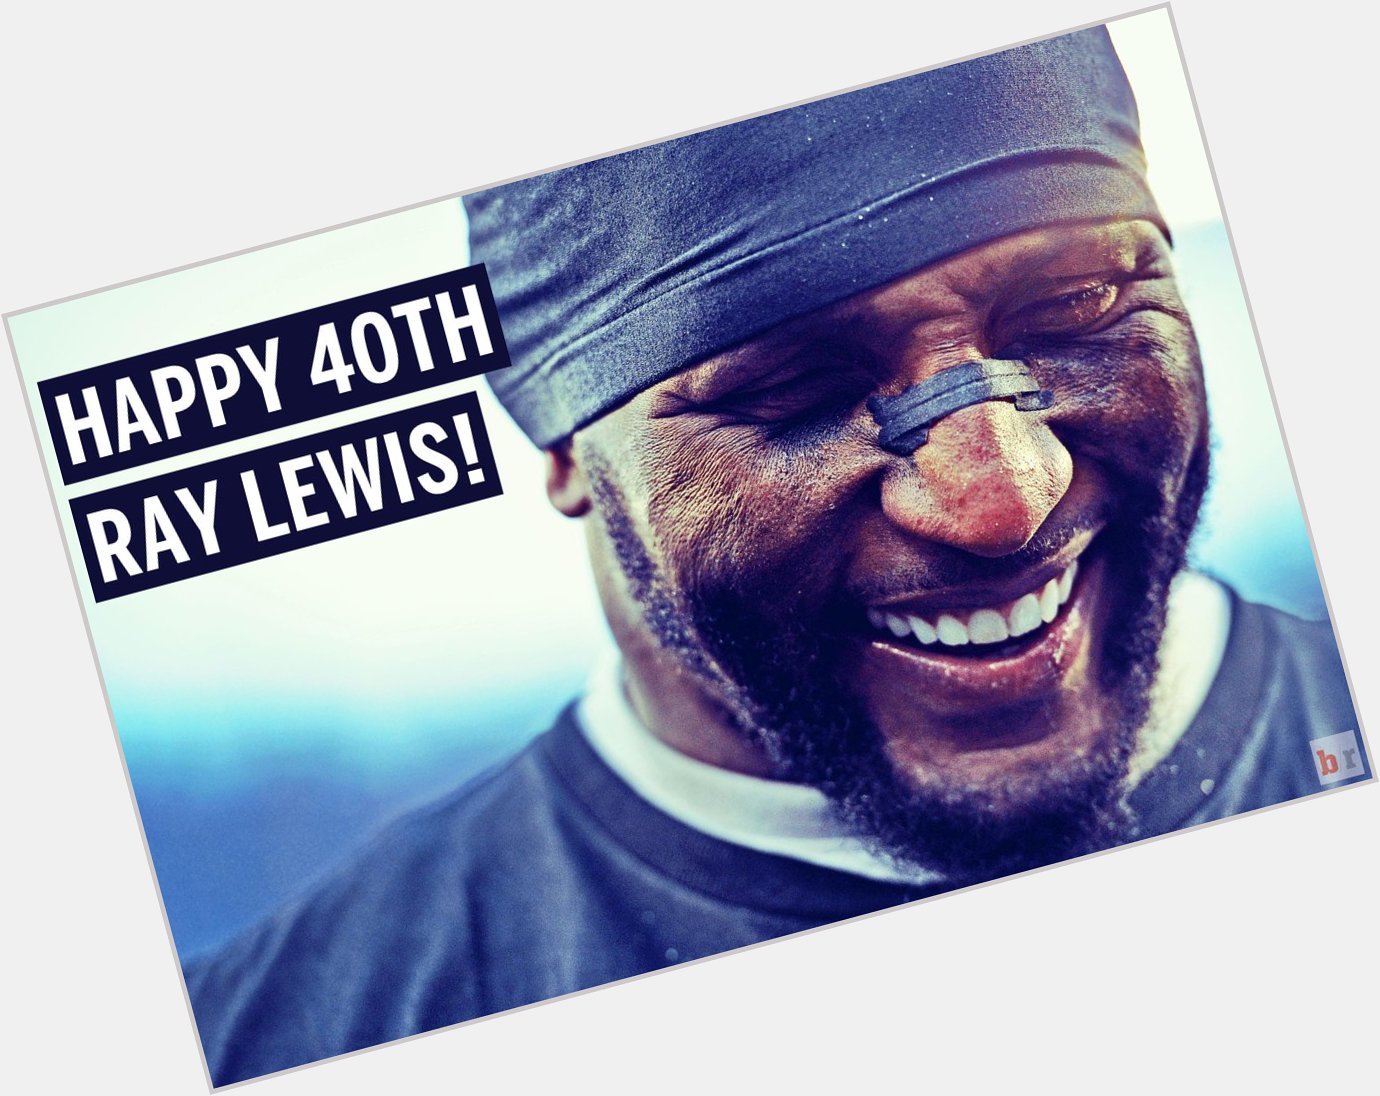 Happy 40th birthday to Ray Lewis! 